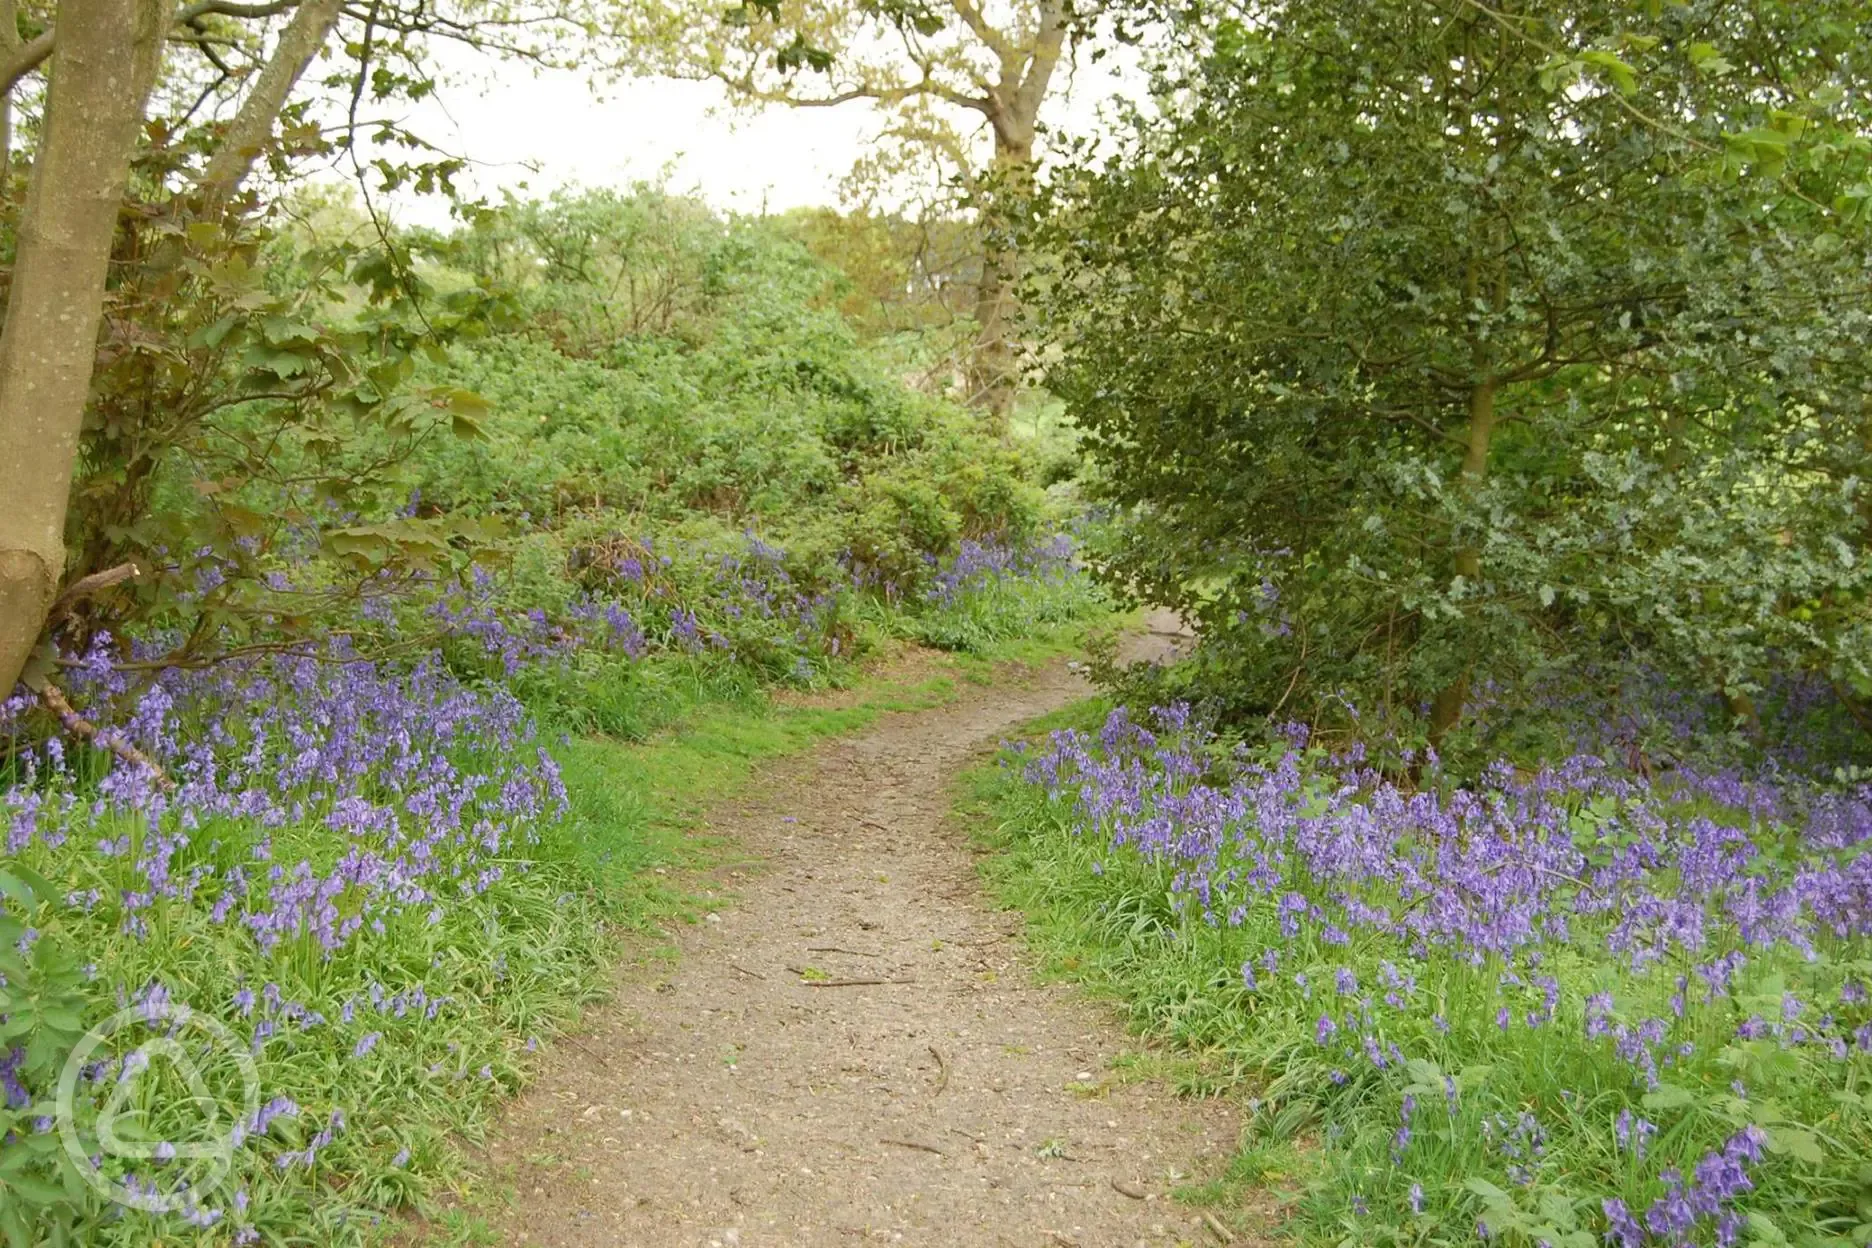 Nearby bluebells